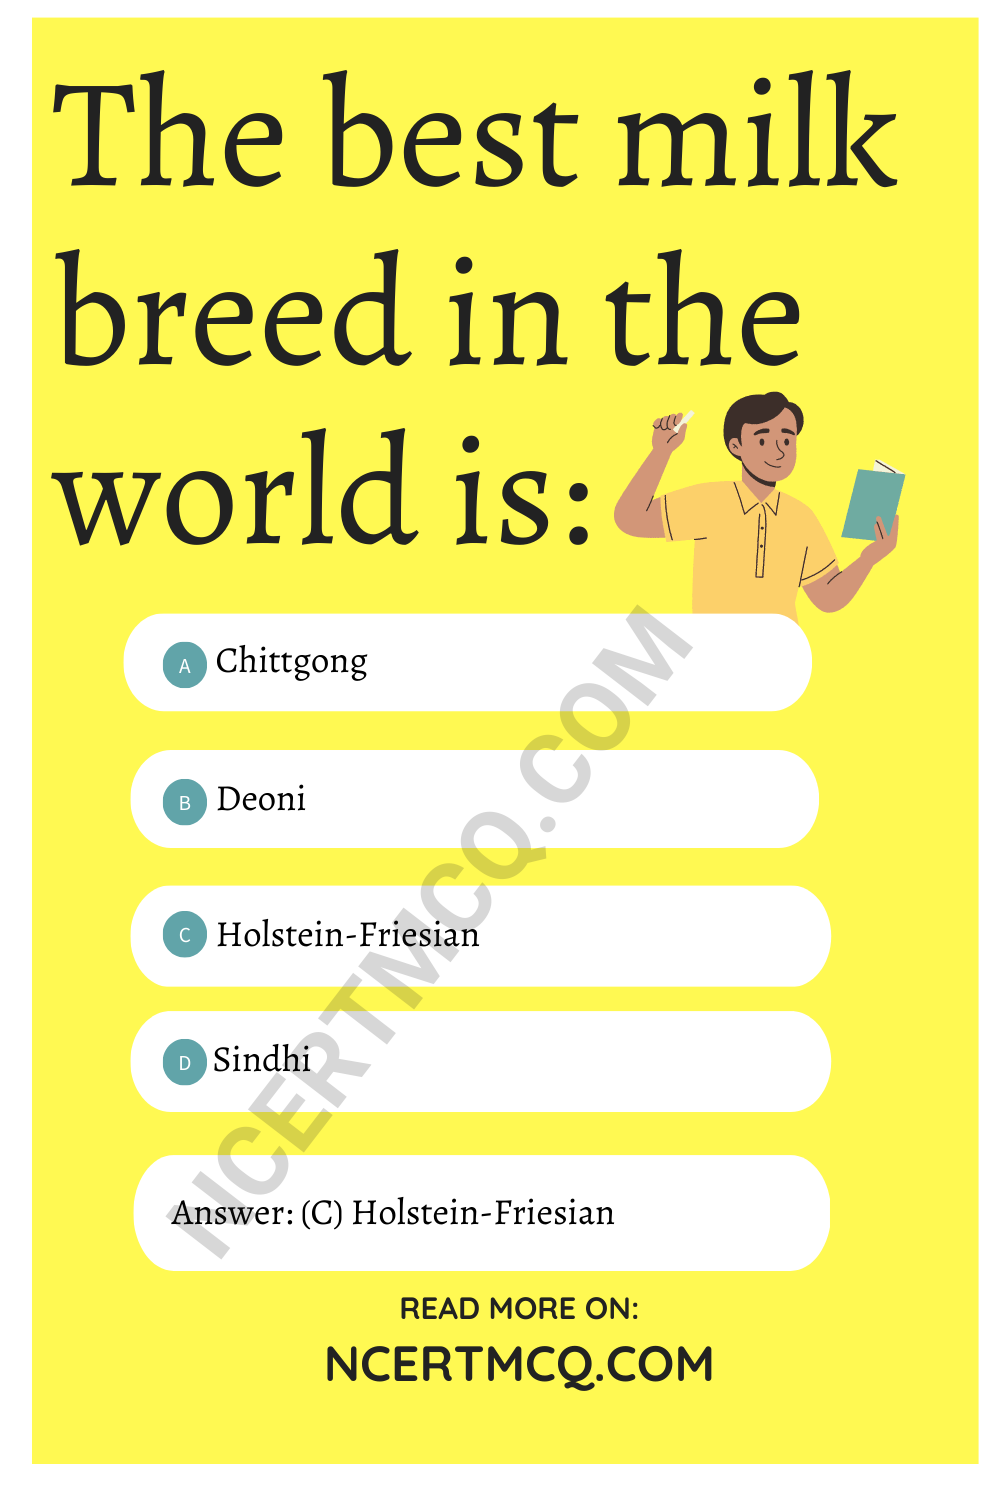 The best milk breed in the world is: